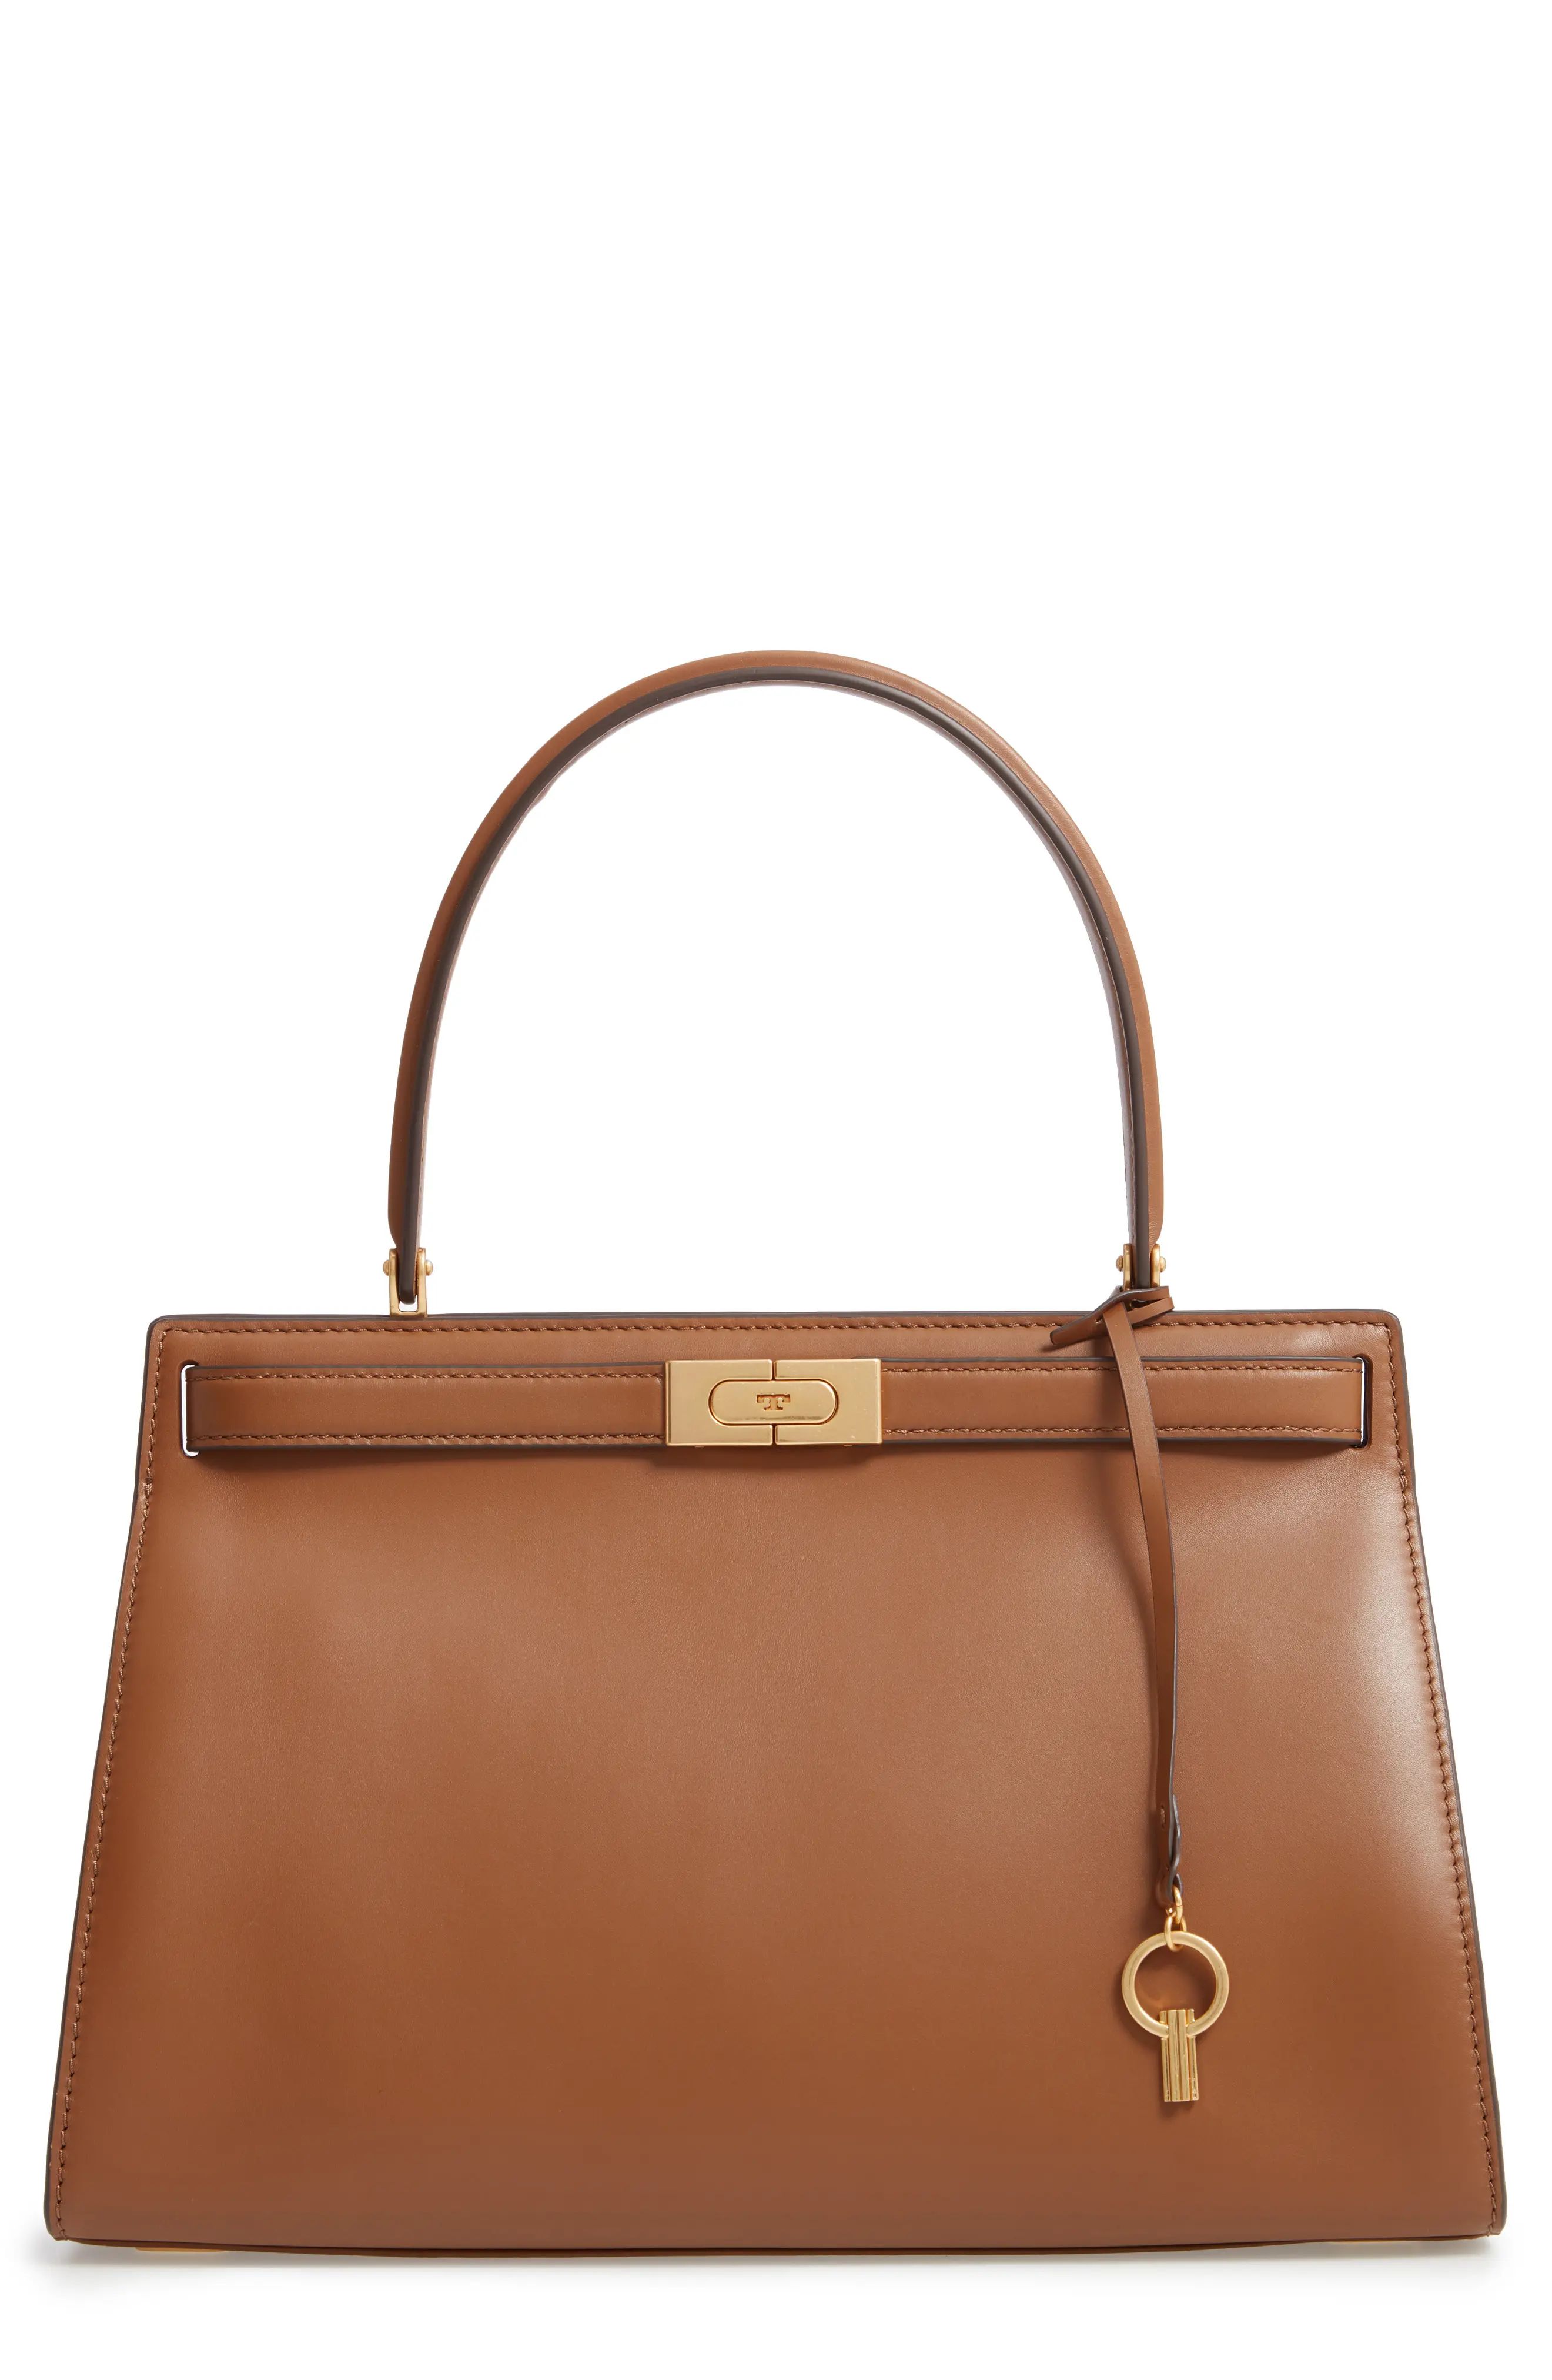 Tory Burch Lee Radziwill Small Leather Satchel | Nordstrom